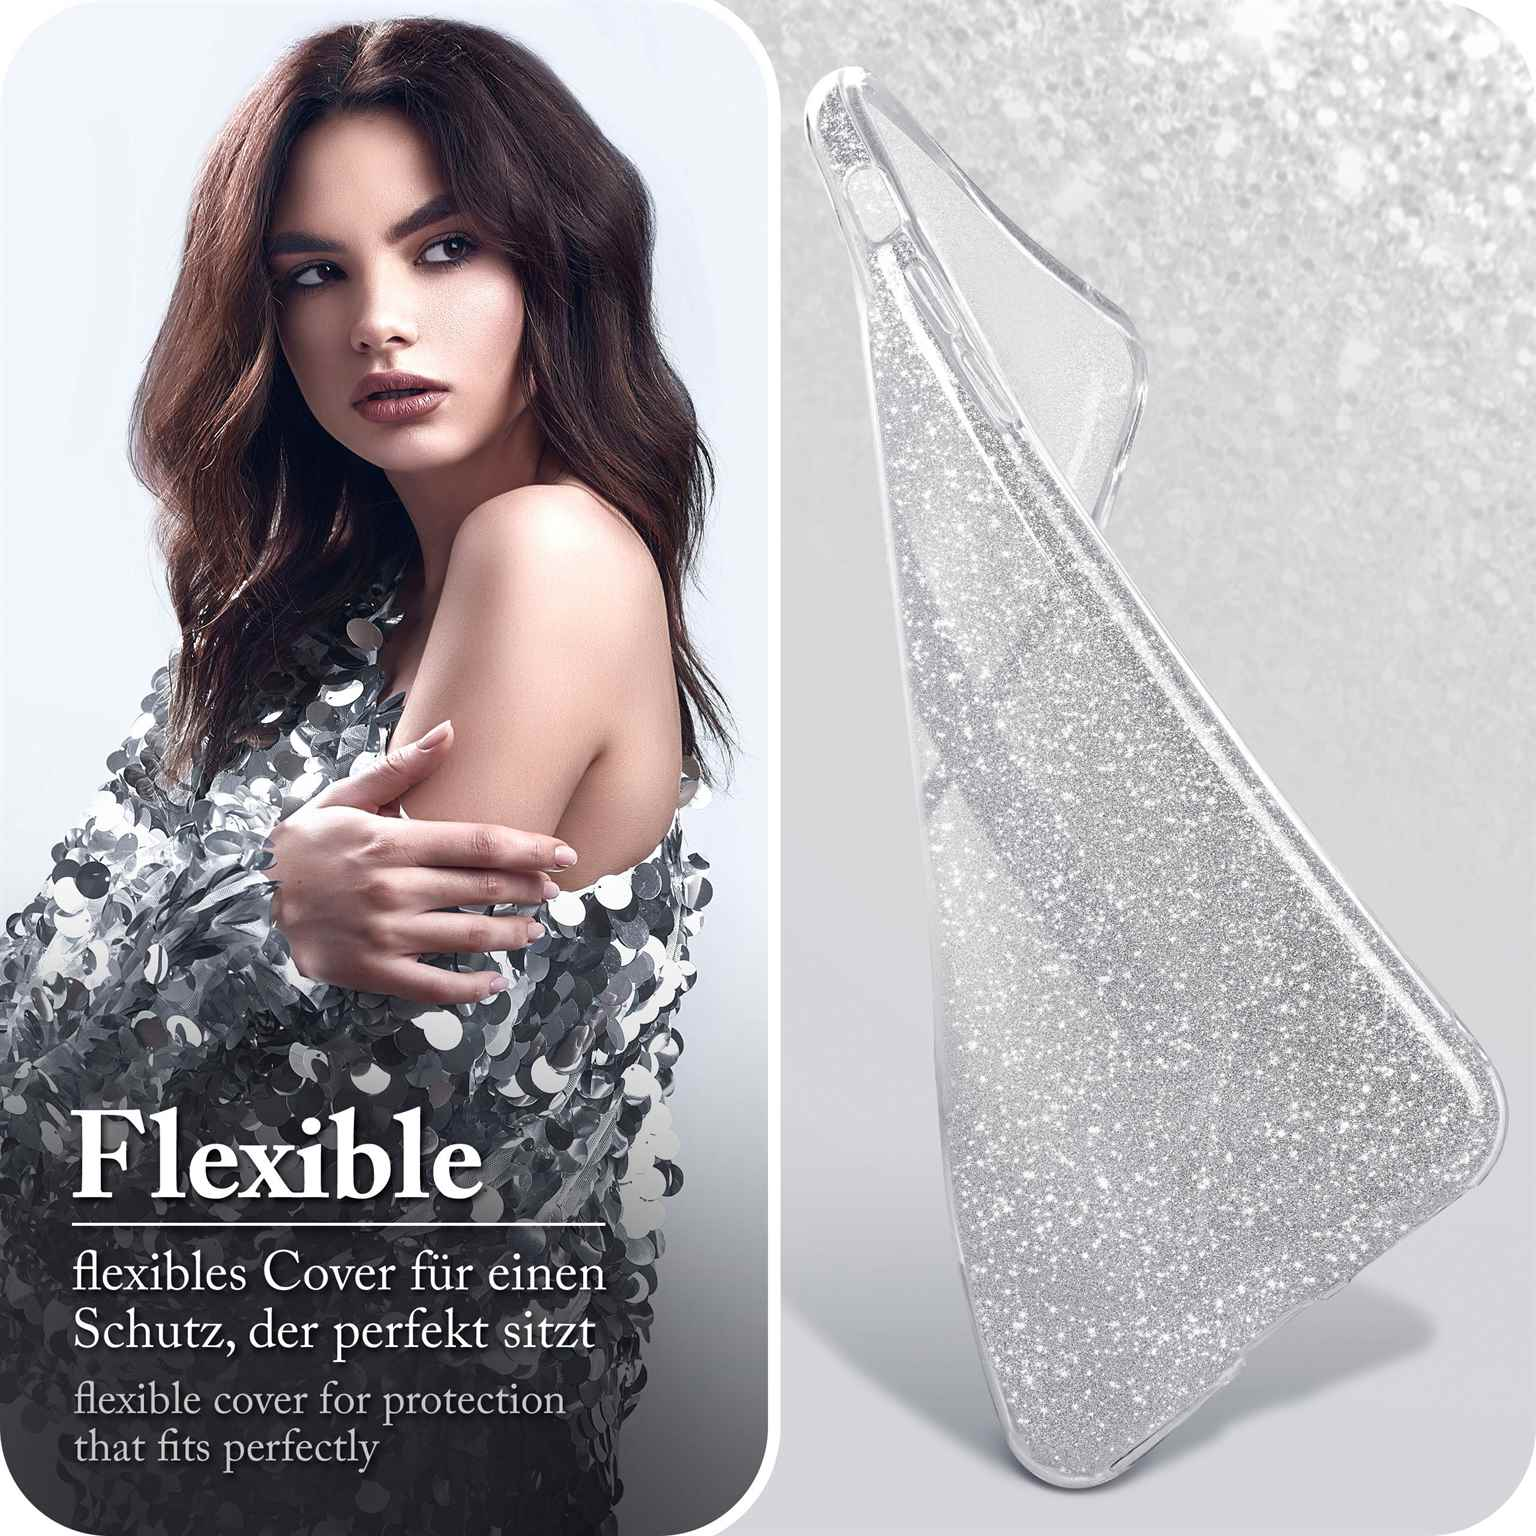 ONEFLOW Glitter Case, Backcover, XR, Sparkle Apple, iPhone - Silver